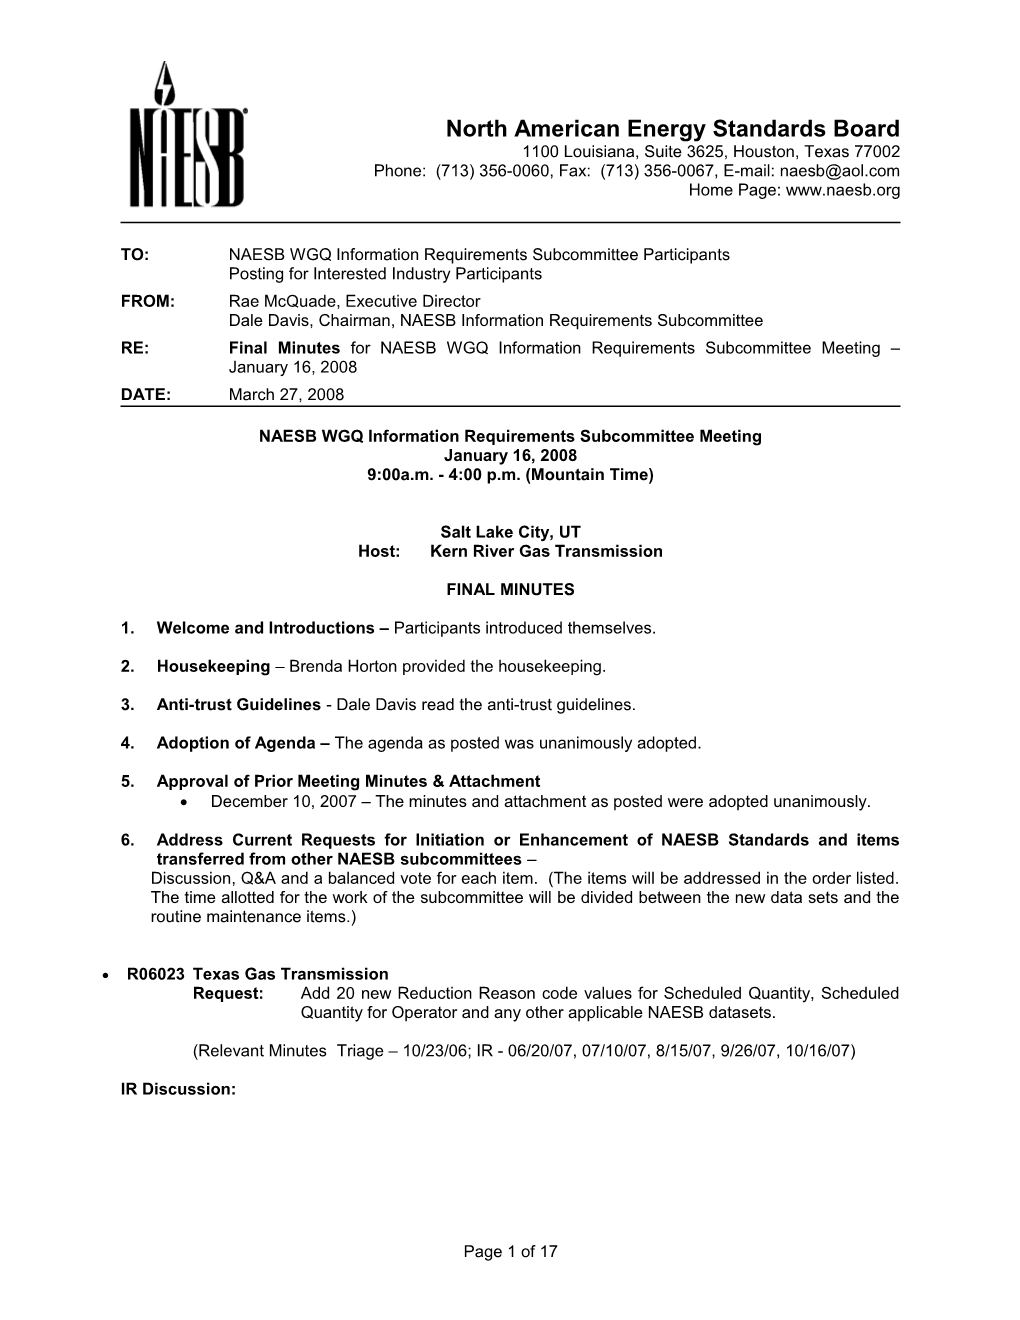 GISB Information Requirements Subcommittee Meeting